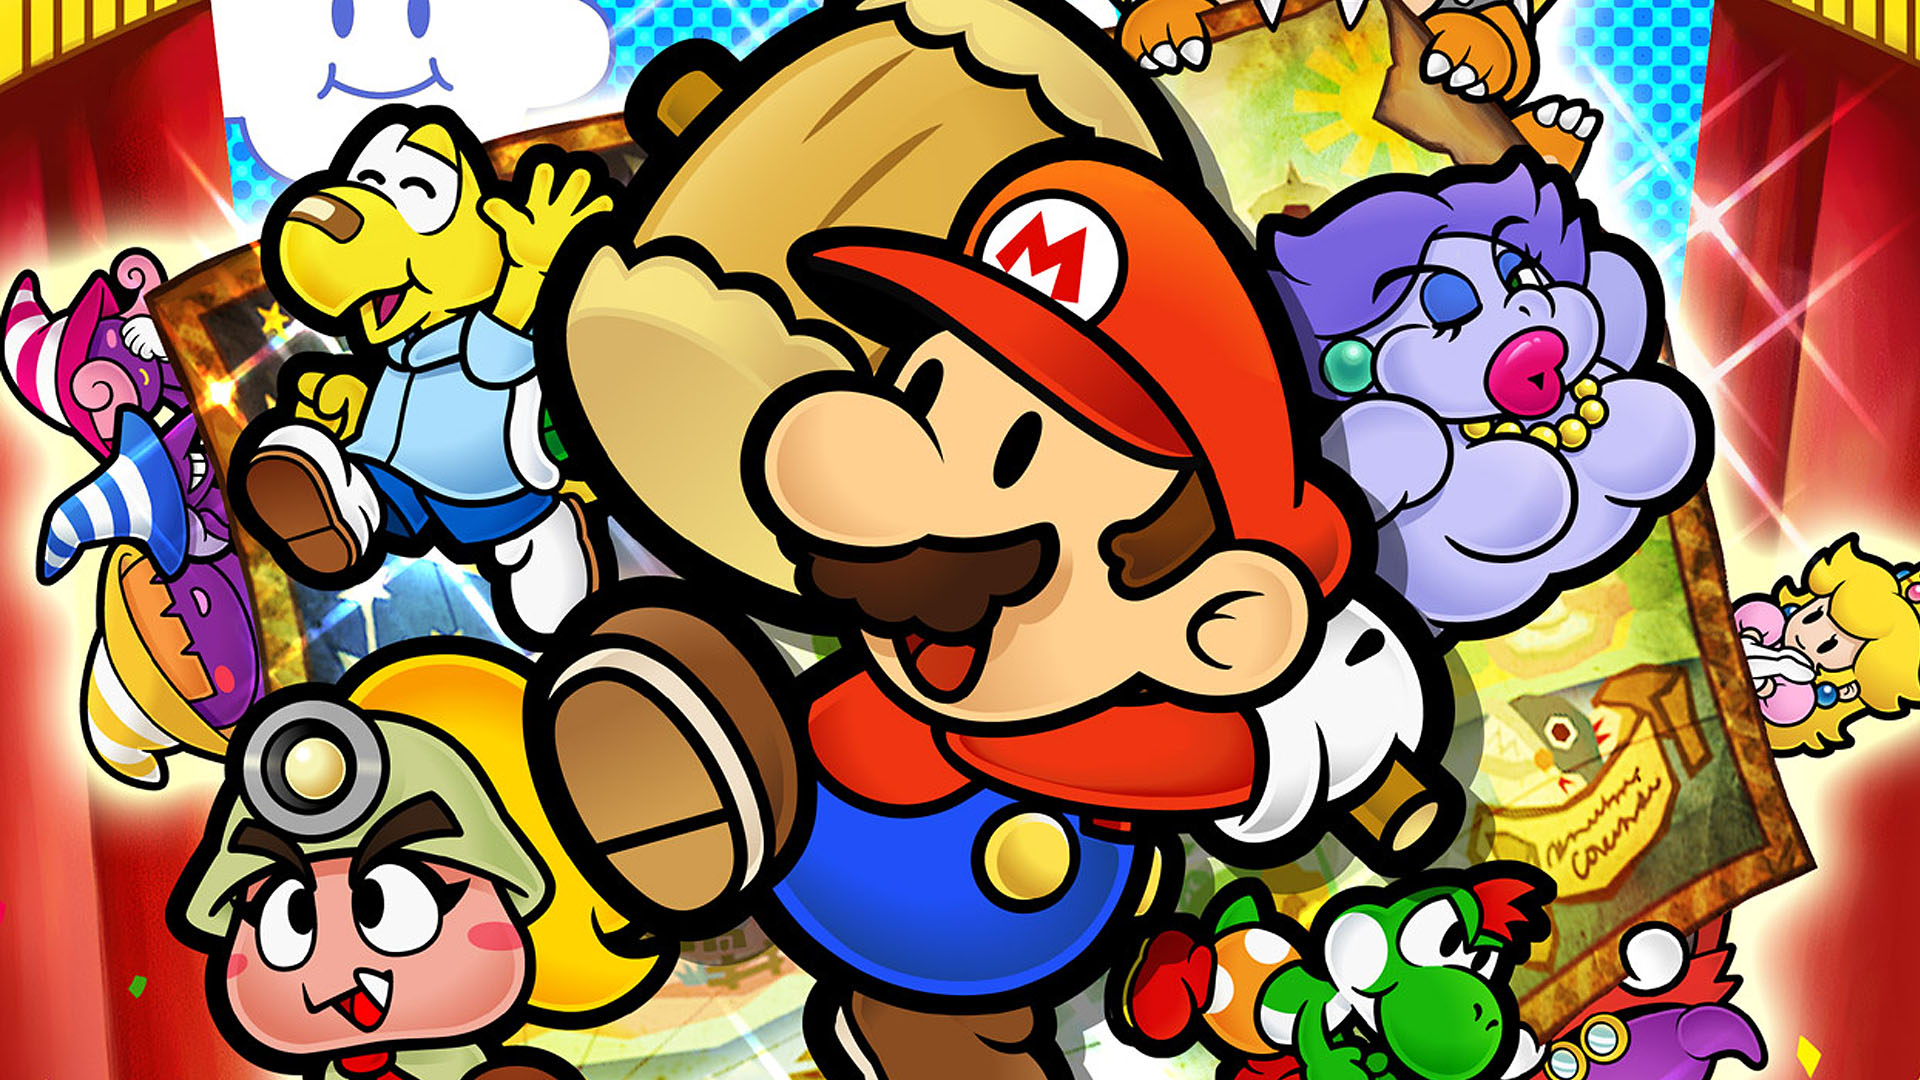  New  Mario  games  and remasters reportedly scheduled for 